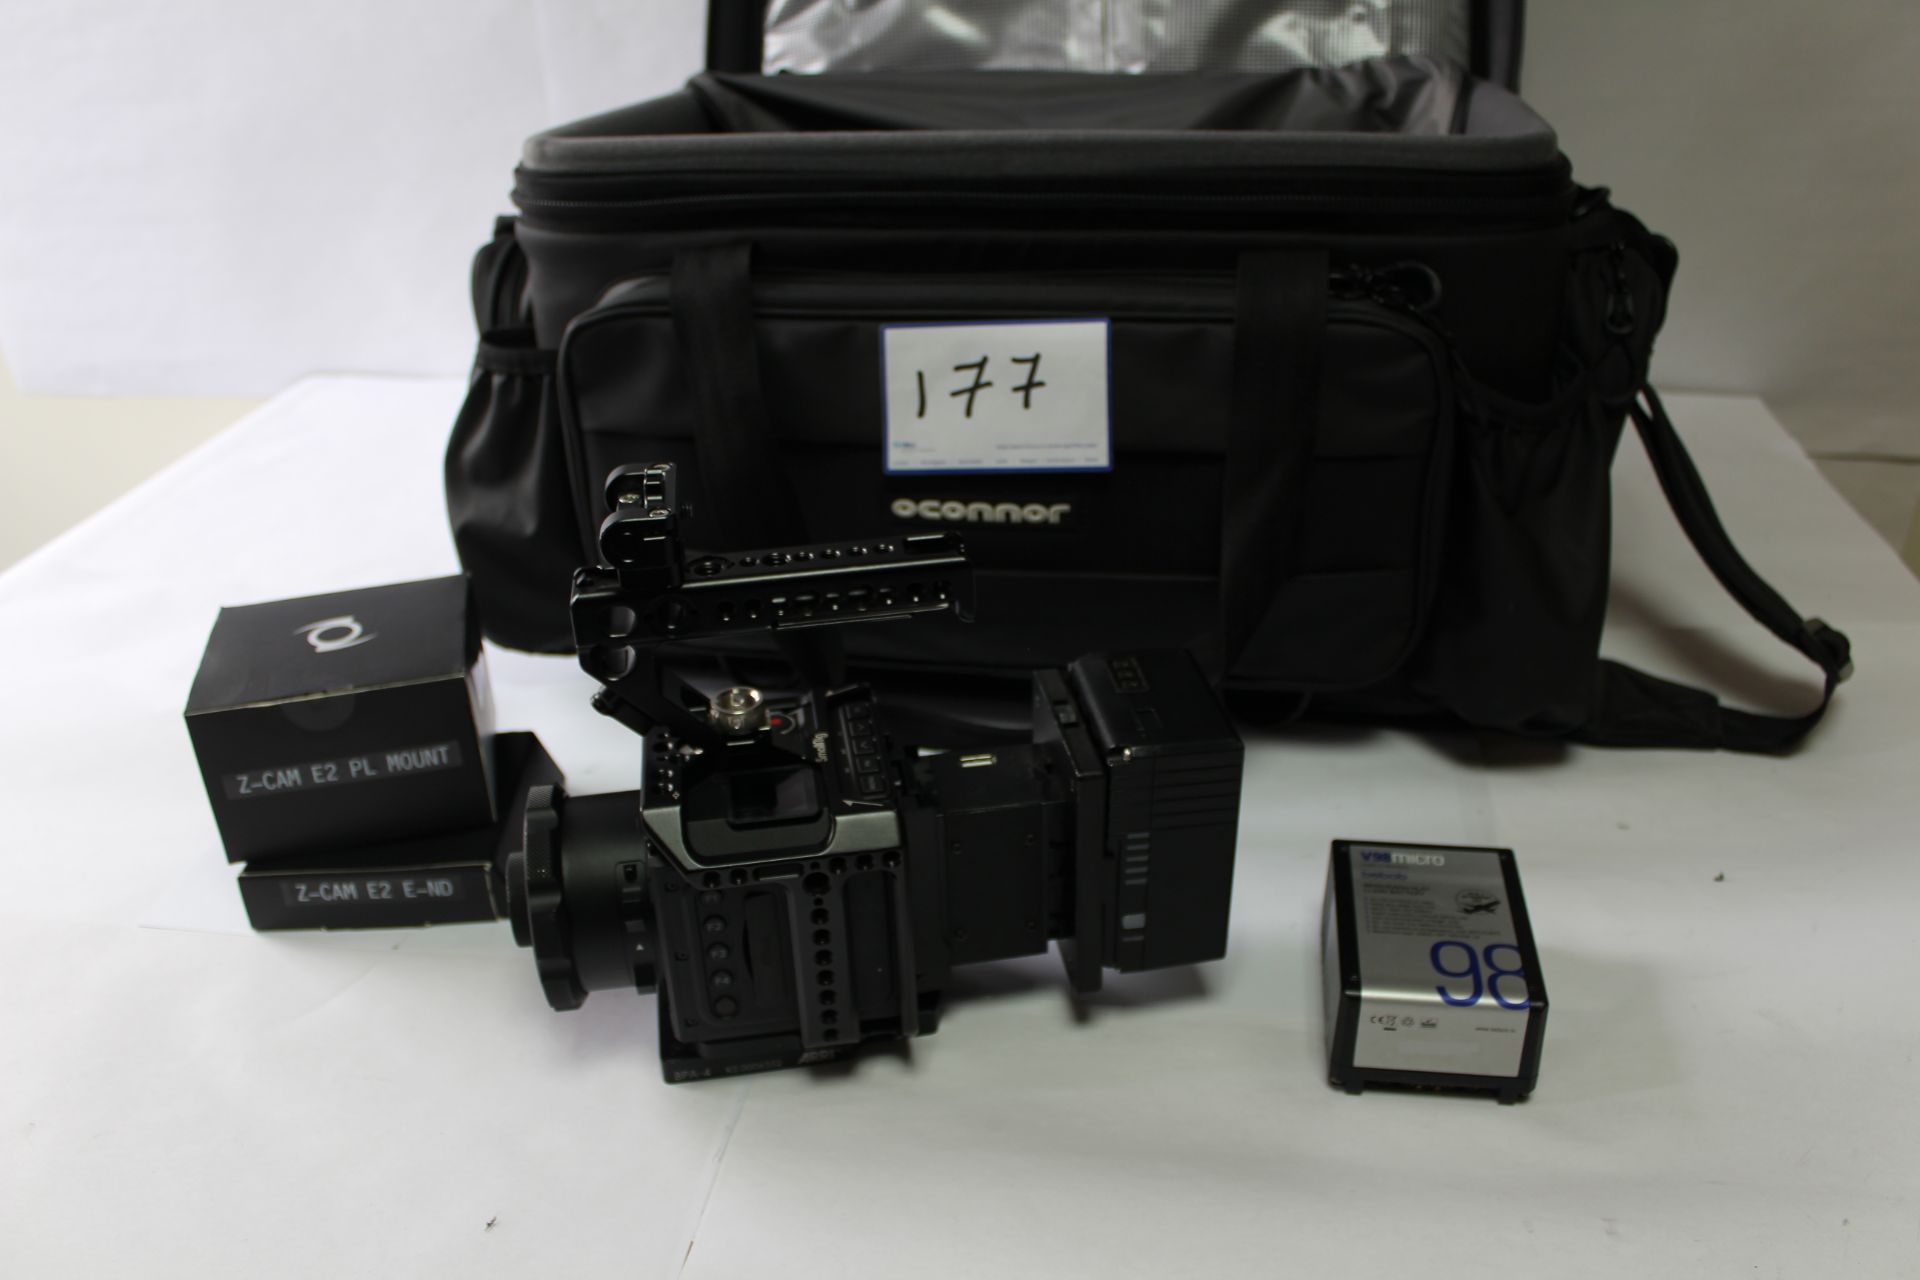 Z Cam E2-F6 Camera Body with 2 Batteries, Accessories and Carry Bag